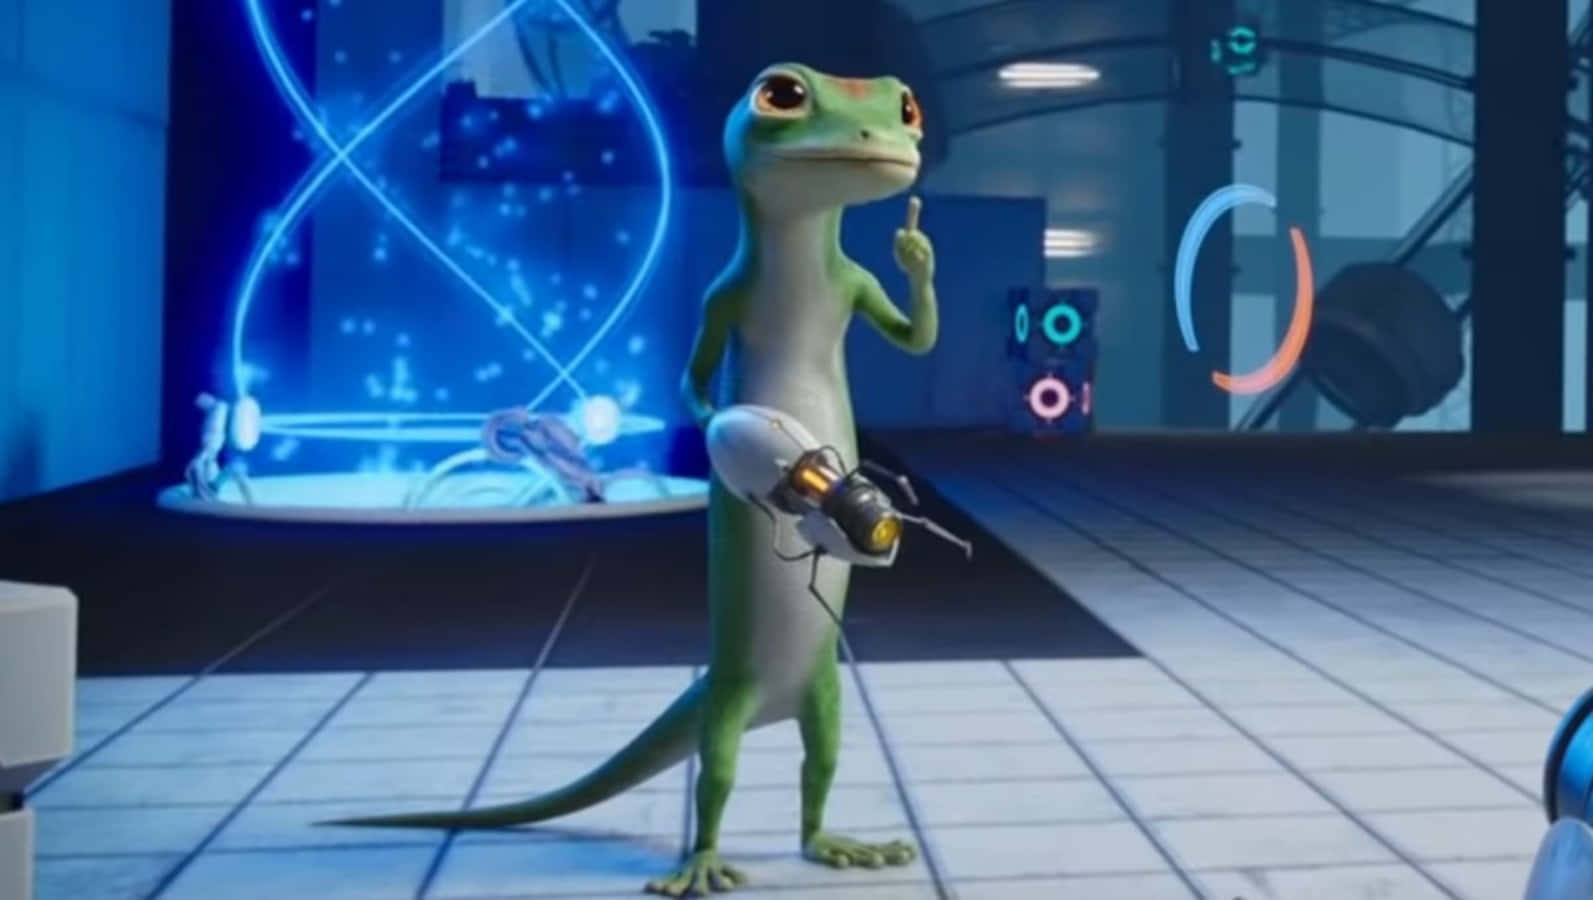 A Green Gecko Is Standing In Front Of A Robot